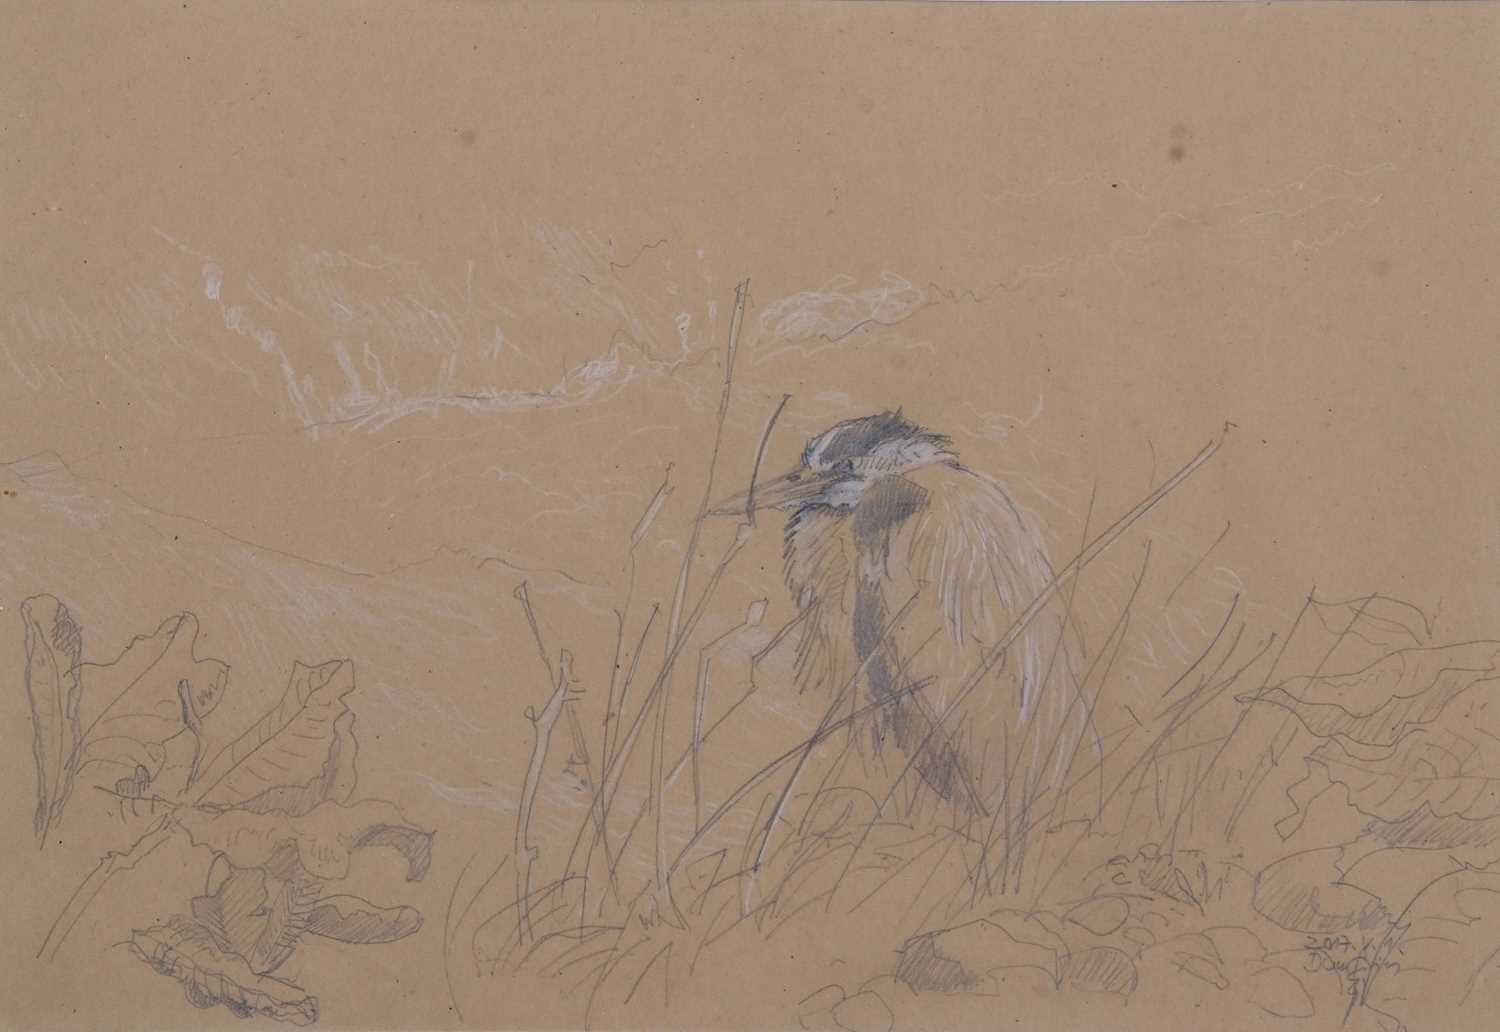 Stefan Bonsch (German, 20th/21st century), Heron in the reeds, pencil heightened in white on - Image 2 of 2